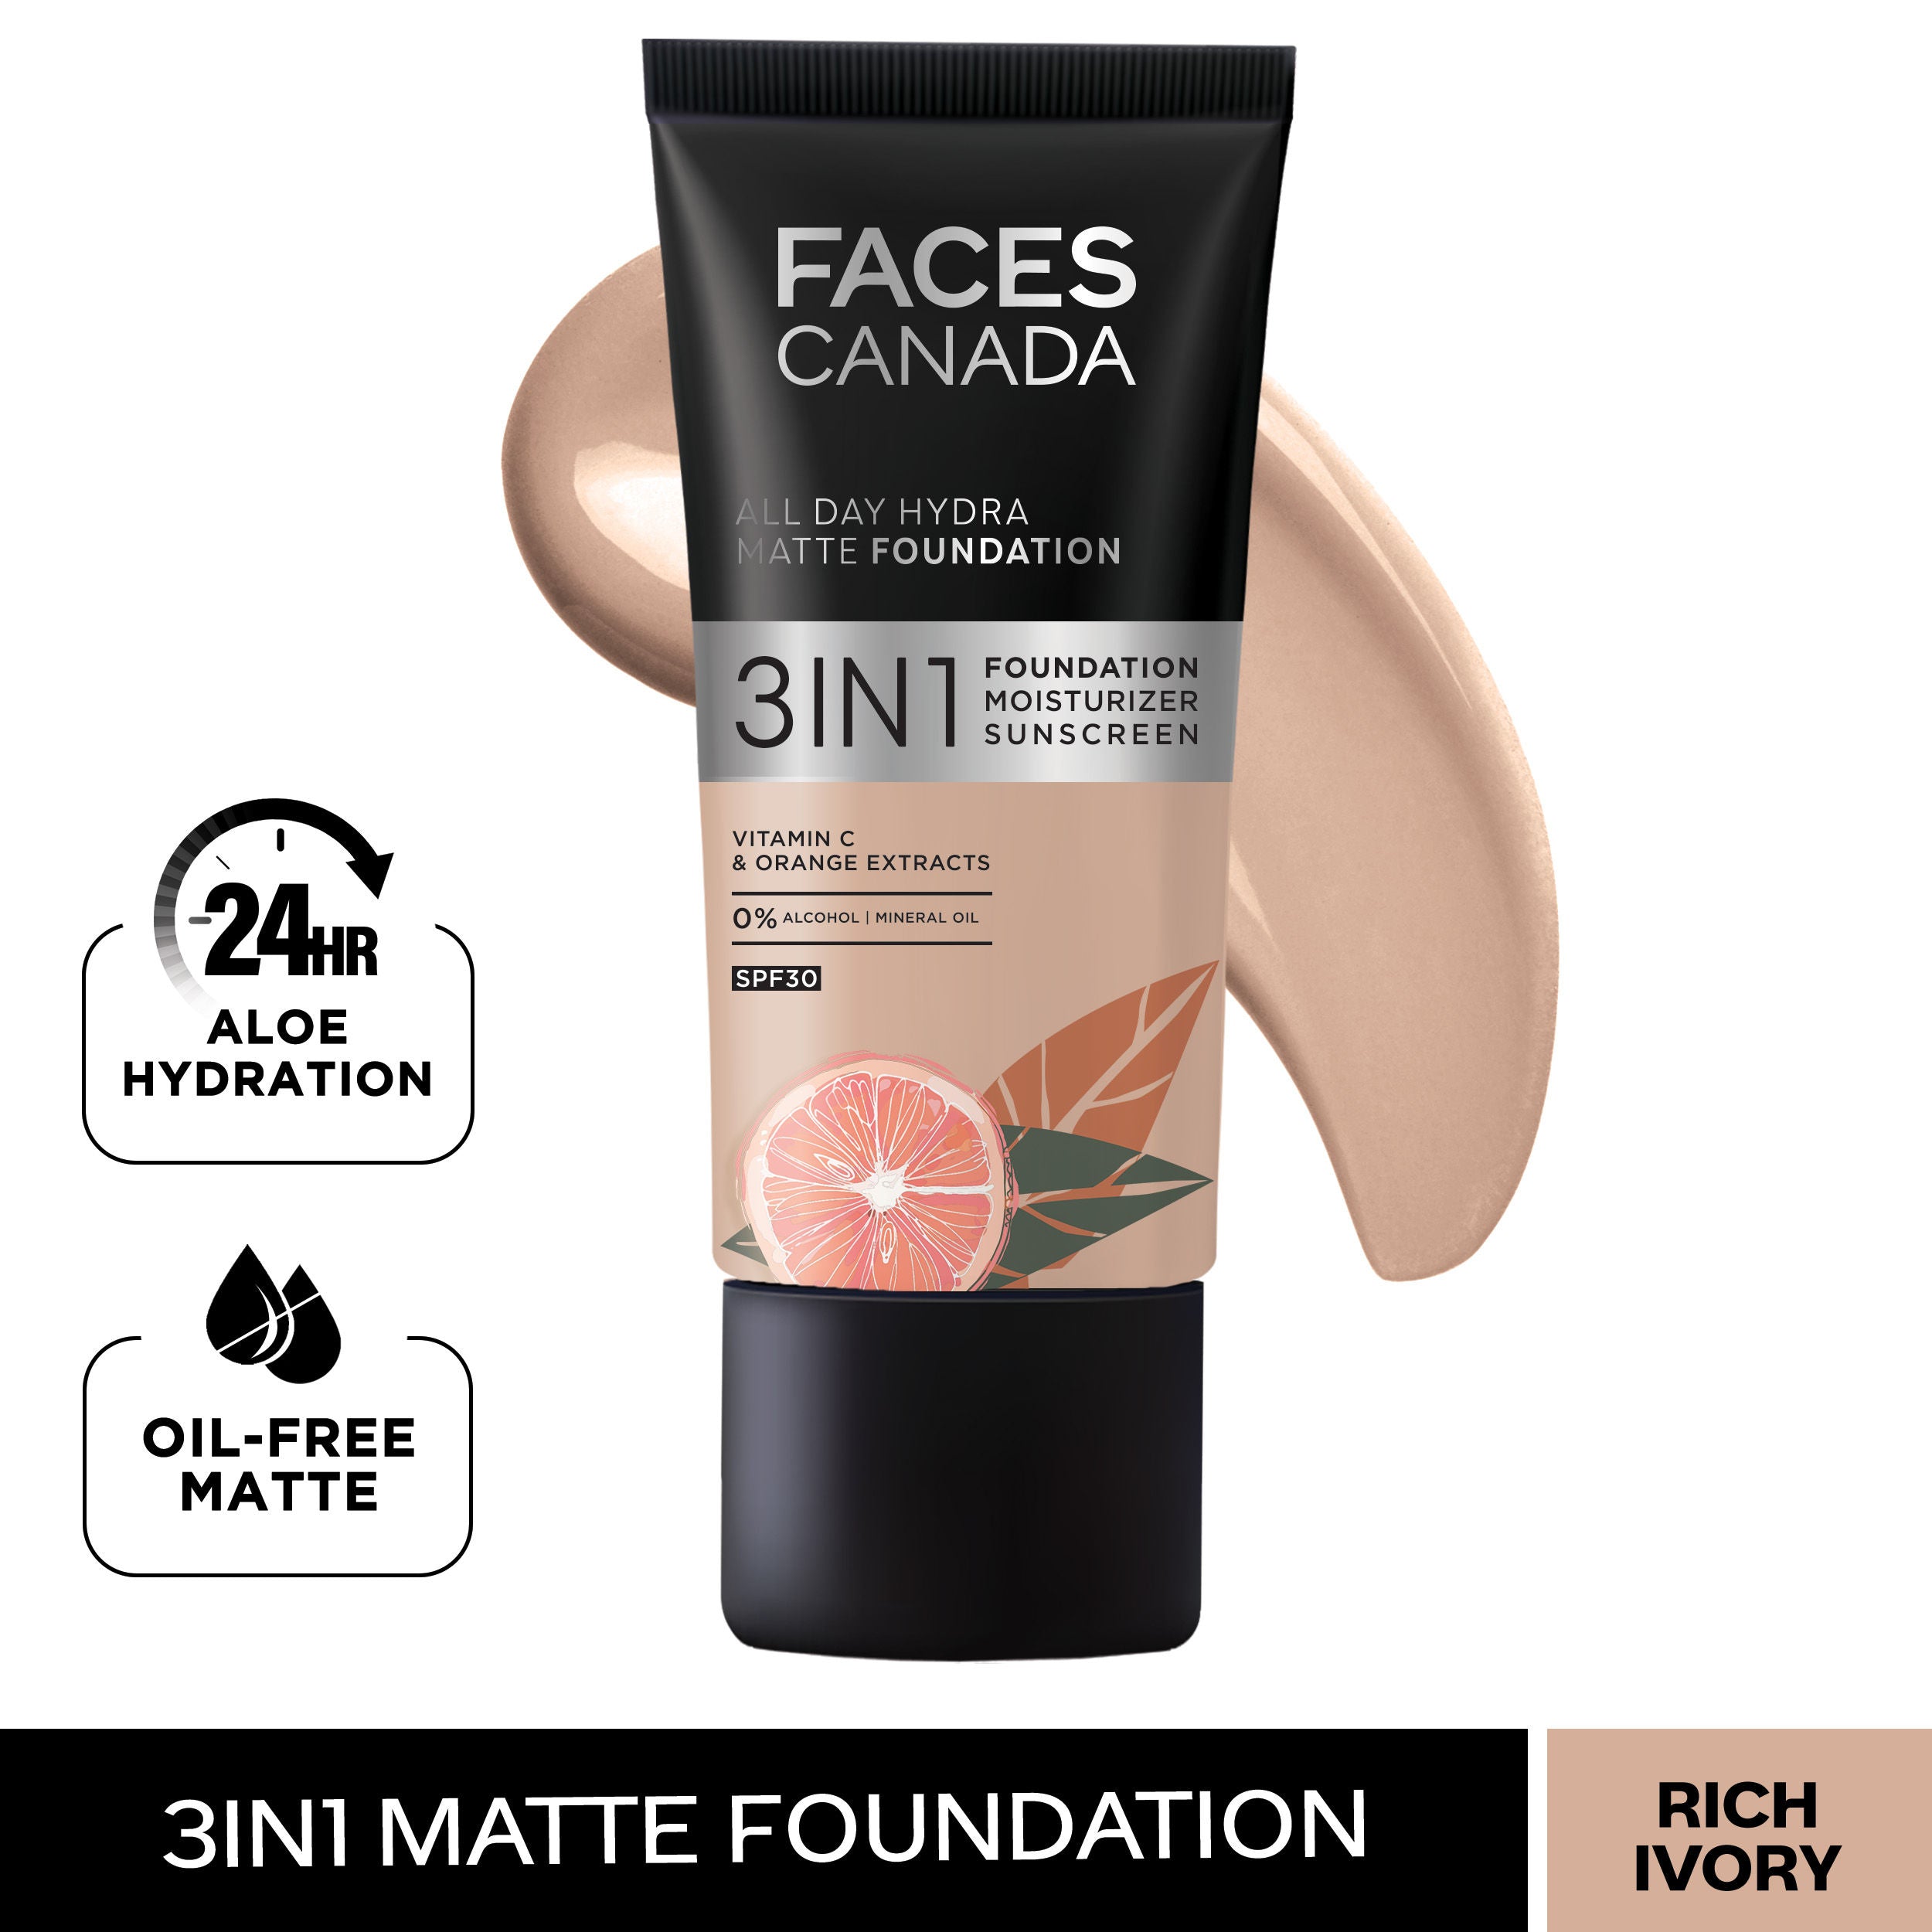 Faces Canada 3 In 1 All Day Hydra Matte Foundation - Rich Ivory 013 (25ml) Faces Canada